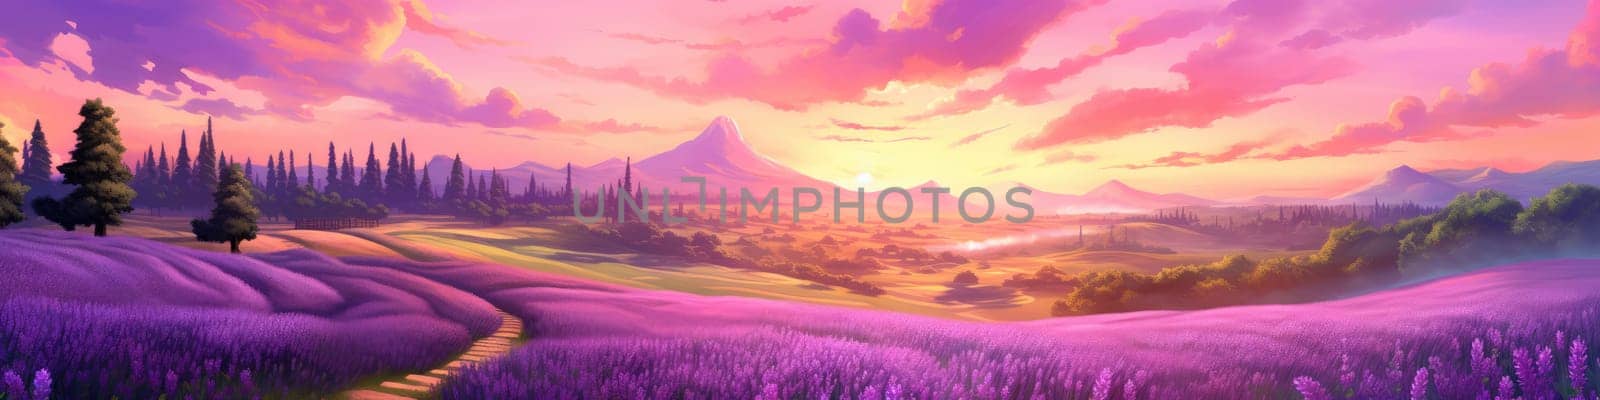 Blooming a lavender field during lovely summer sunset, banner concept